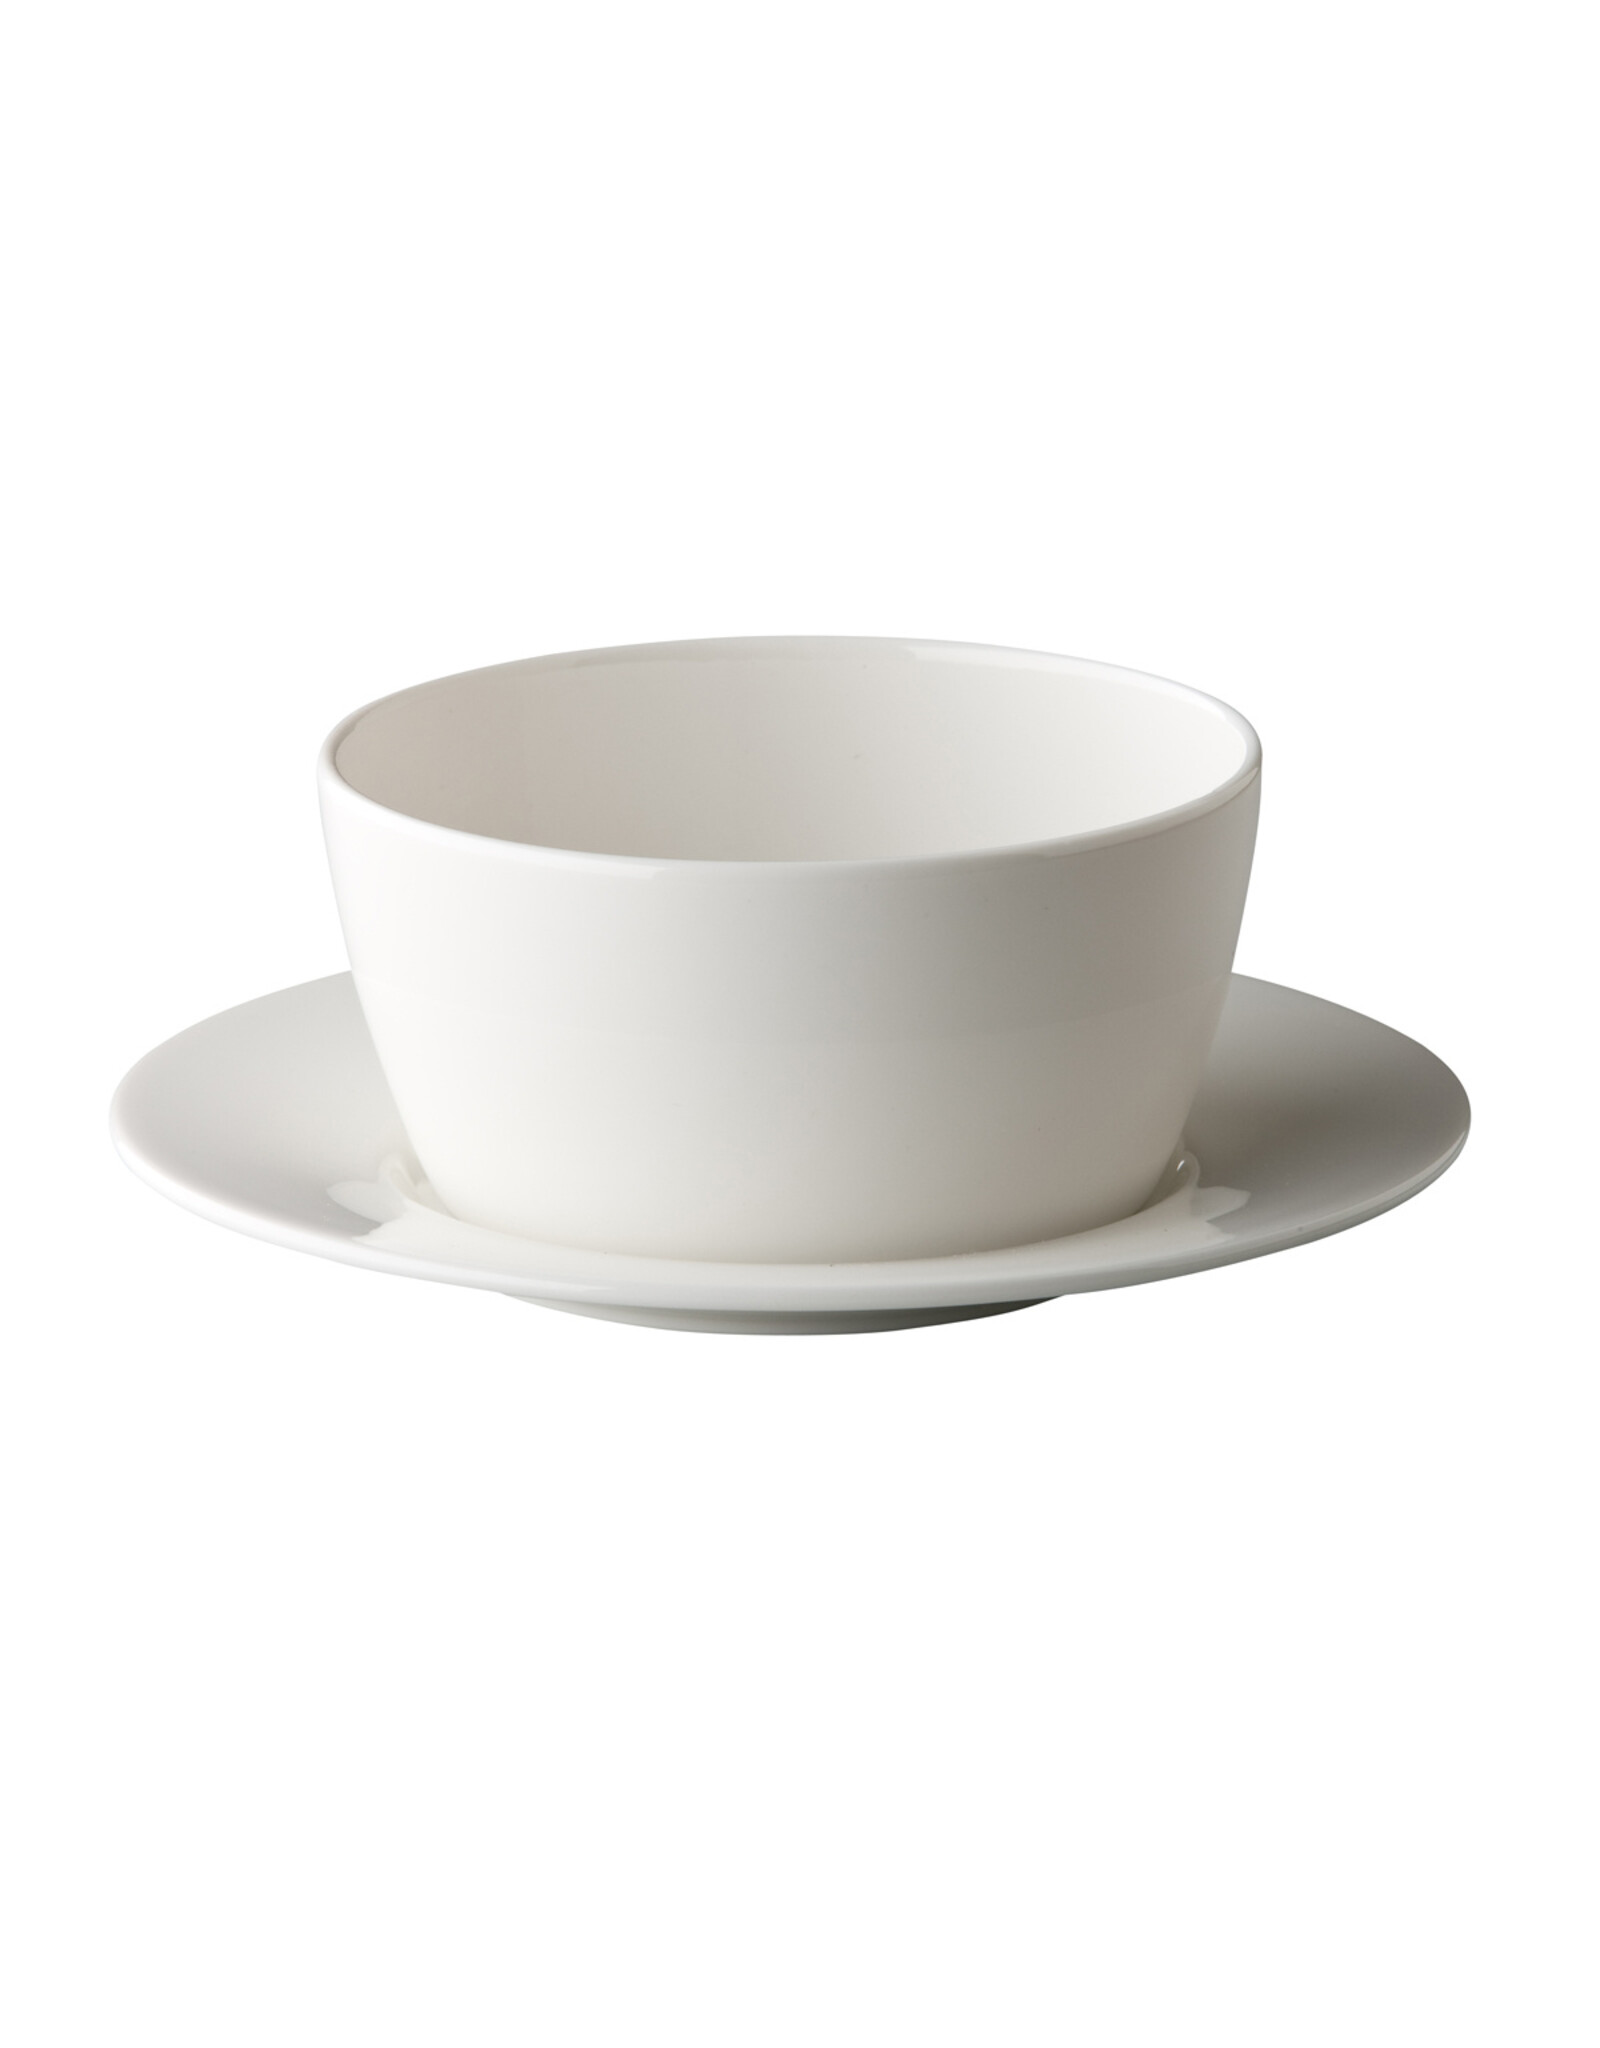 Stylepoint AT side plate & soup saucer 16 cm